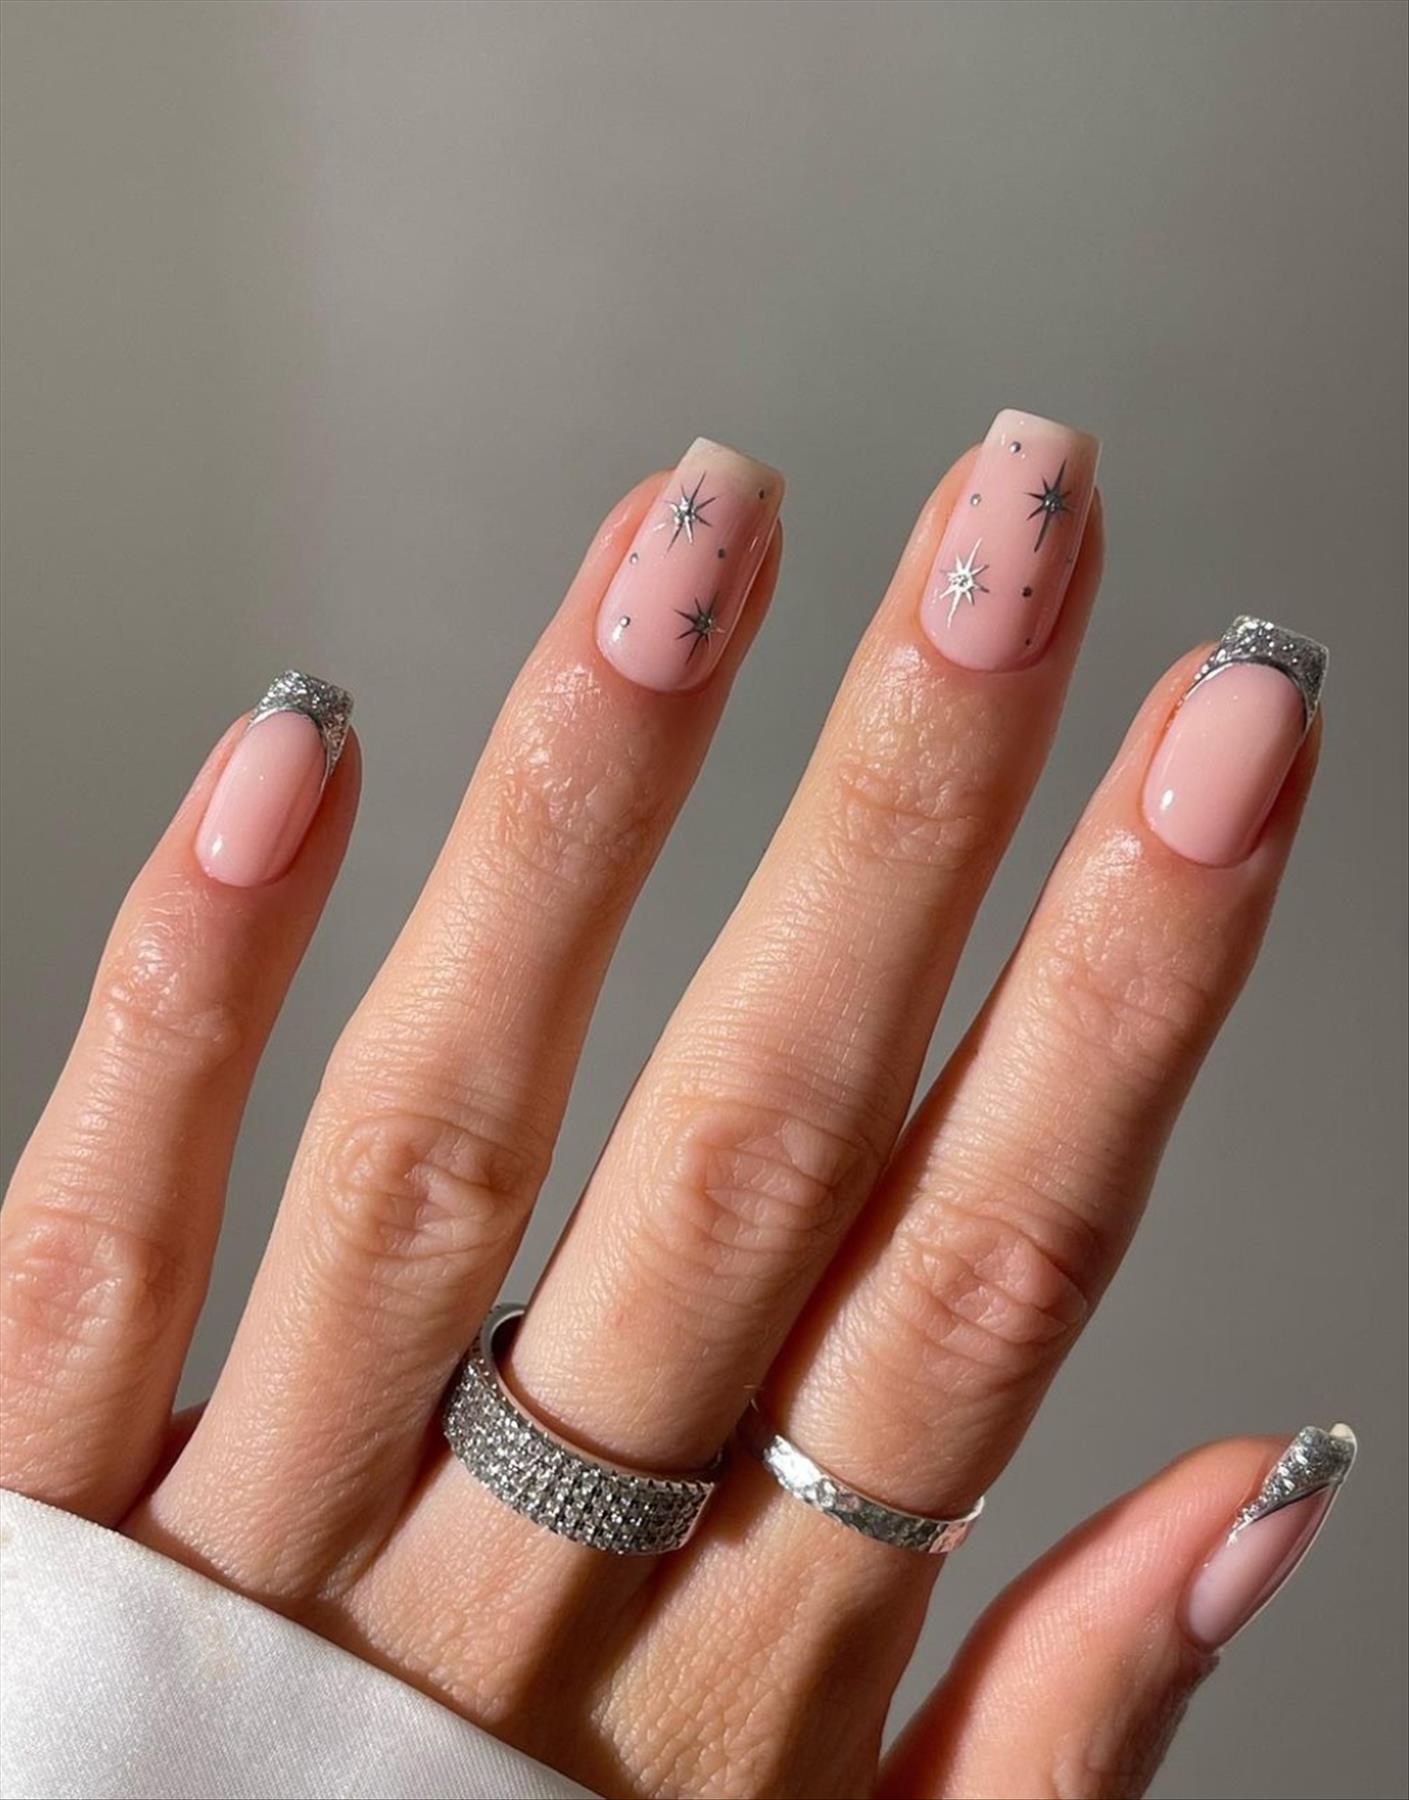 Best New Year Nails Design To Rock This Holiday Season